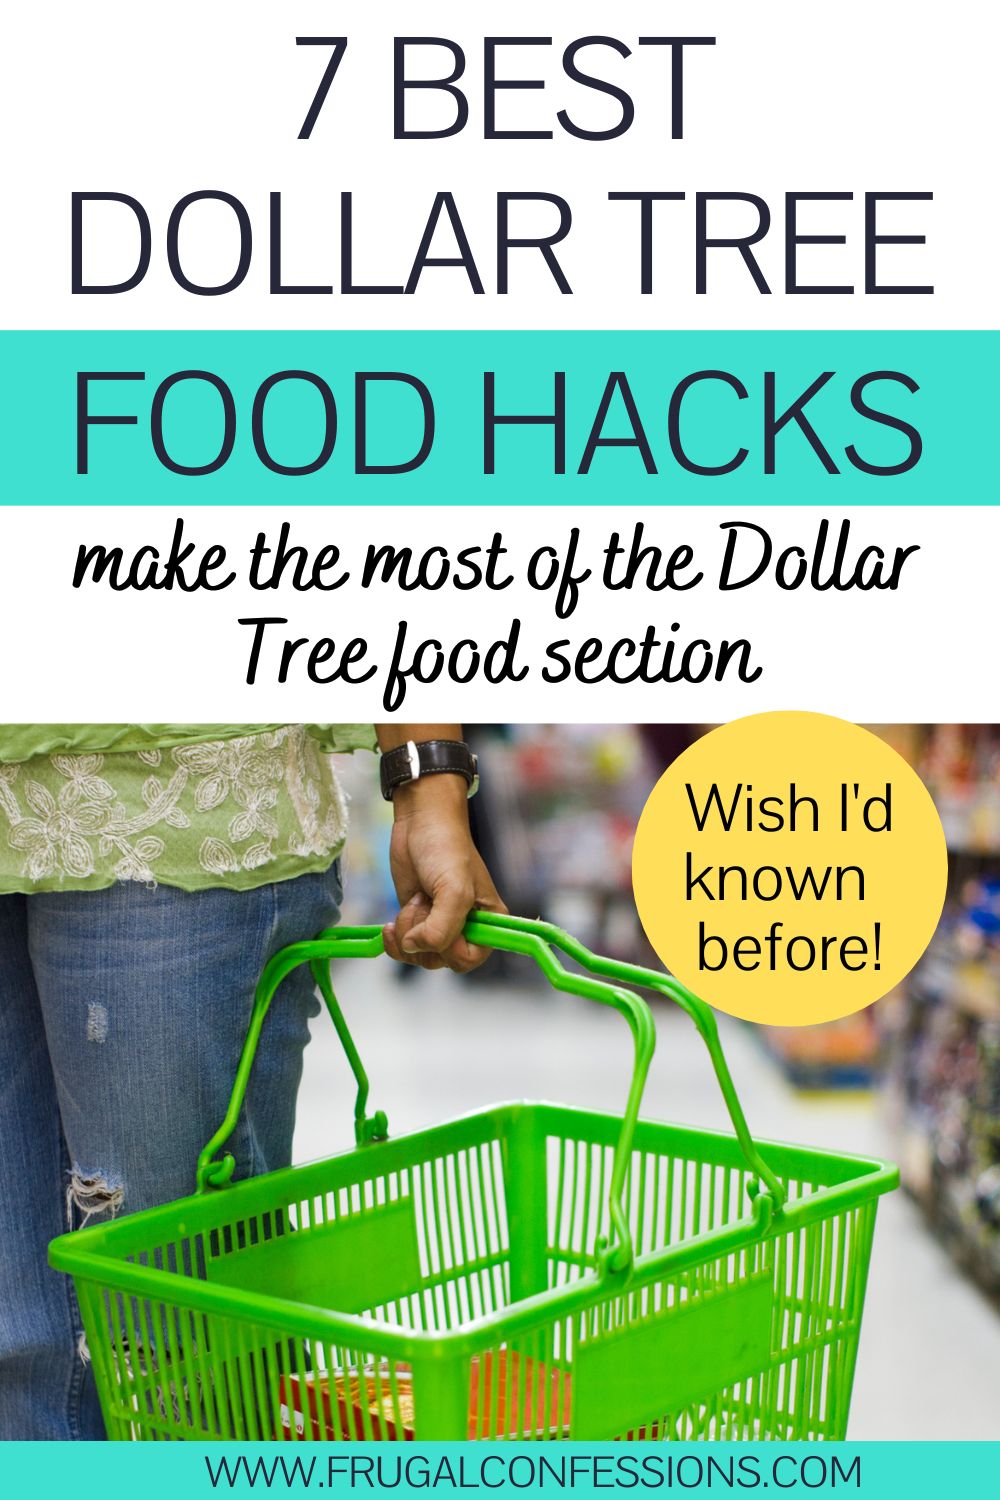 woman with green Dollar Tree basket in store, text overlay "7 best dollar tree food hacks"